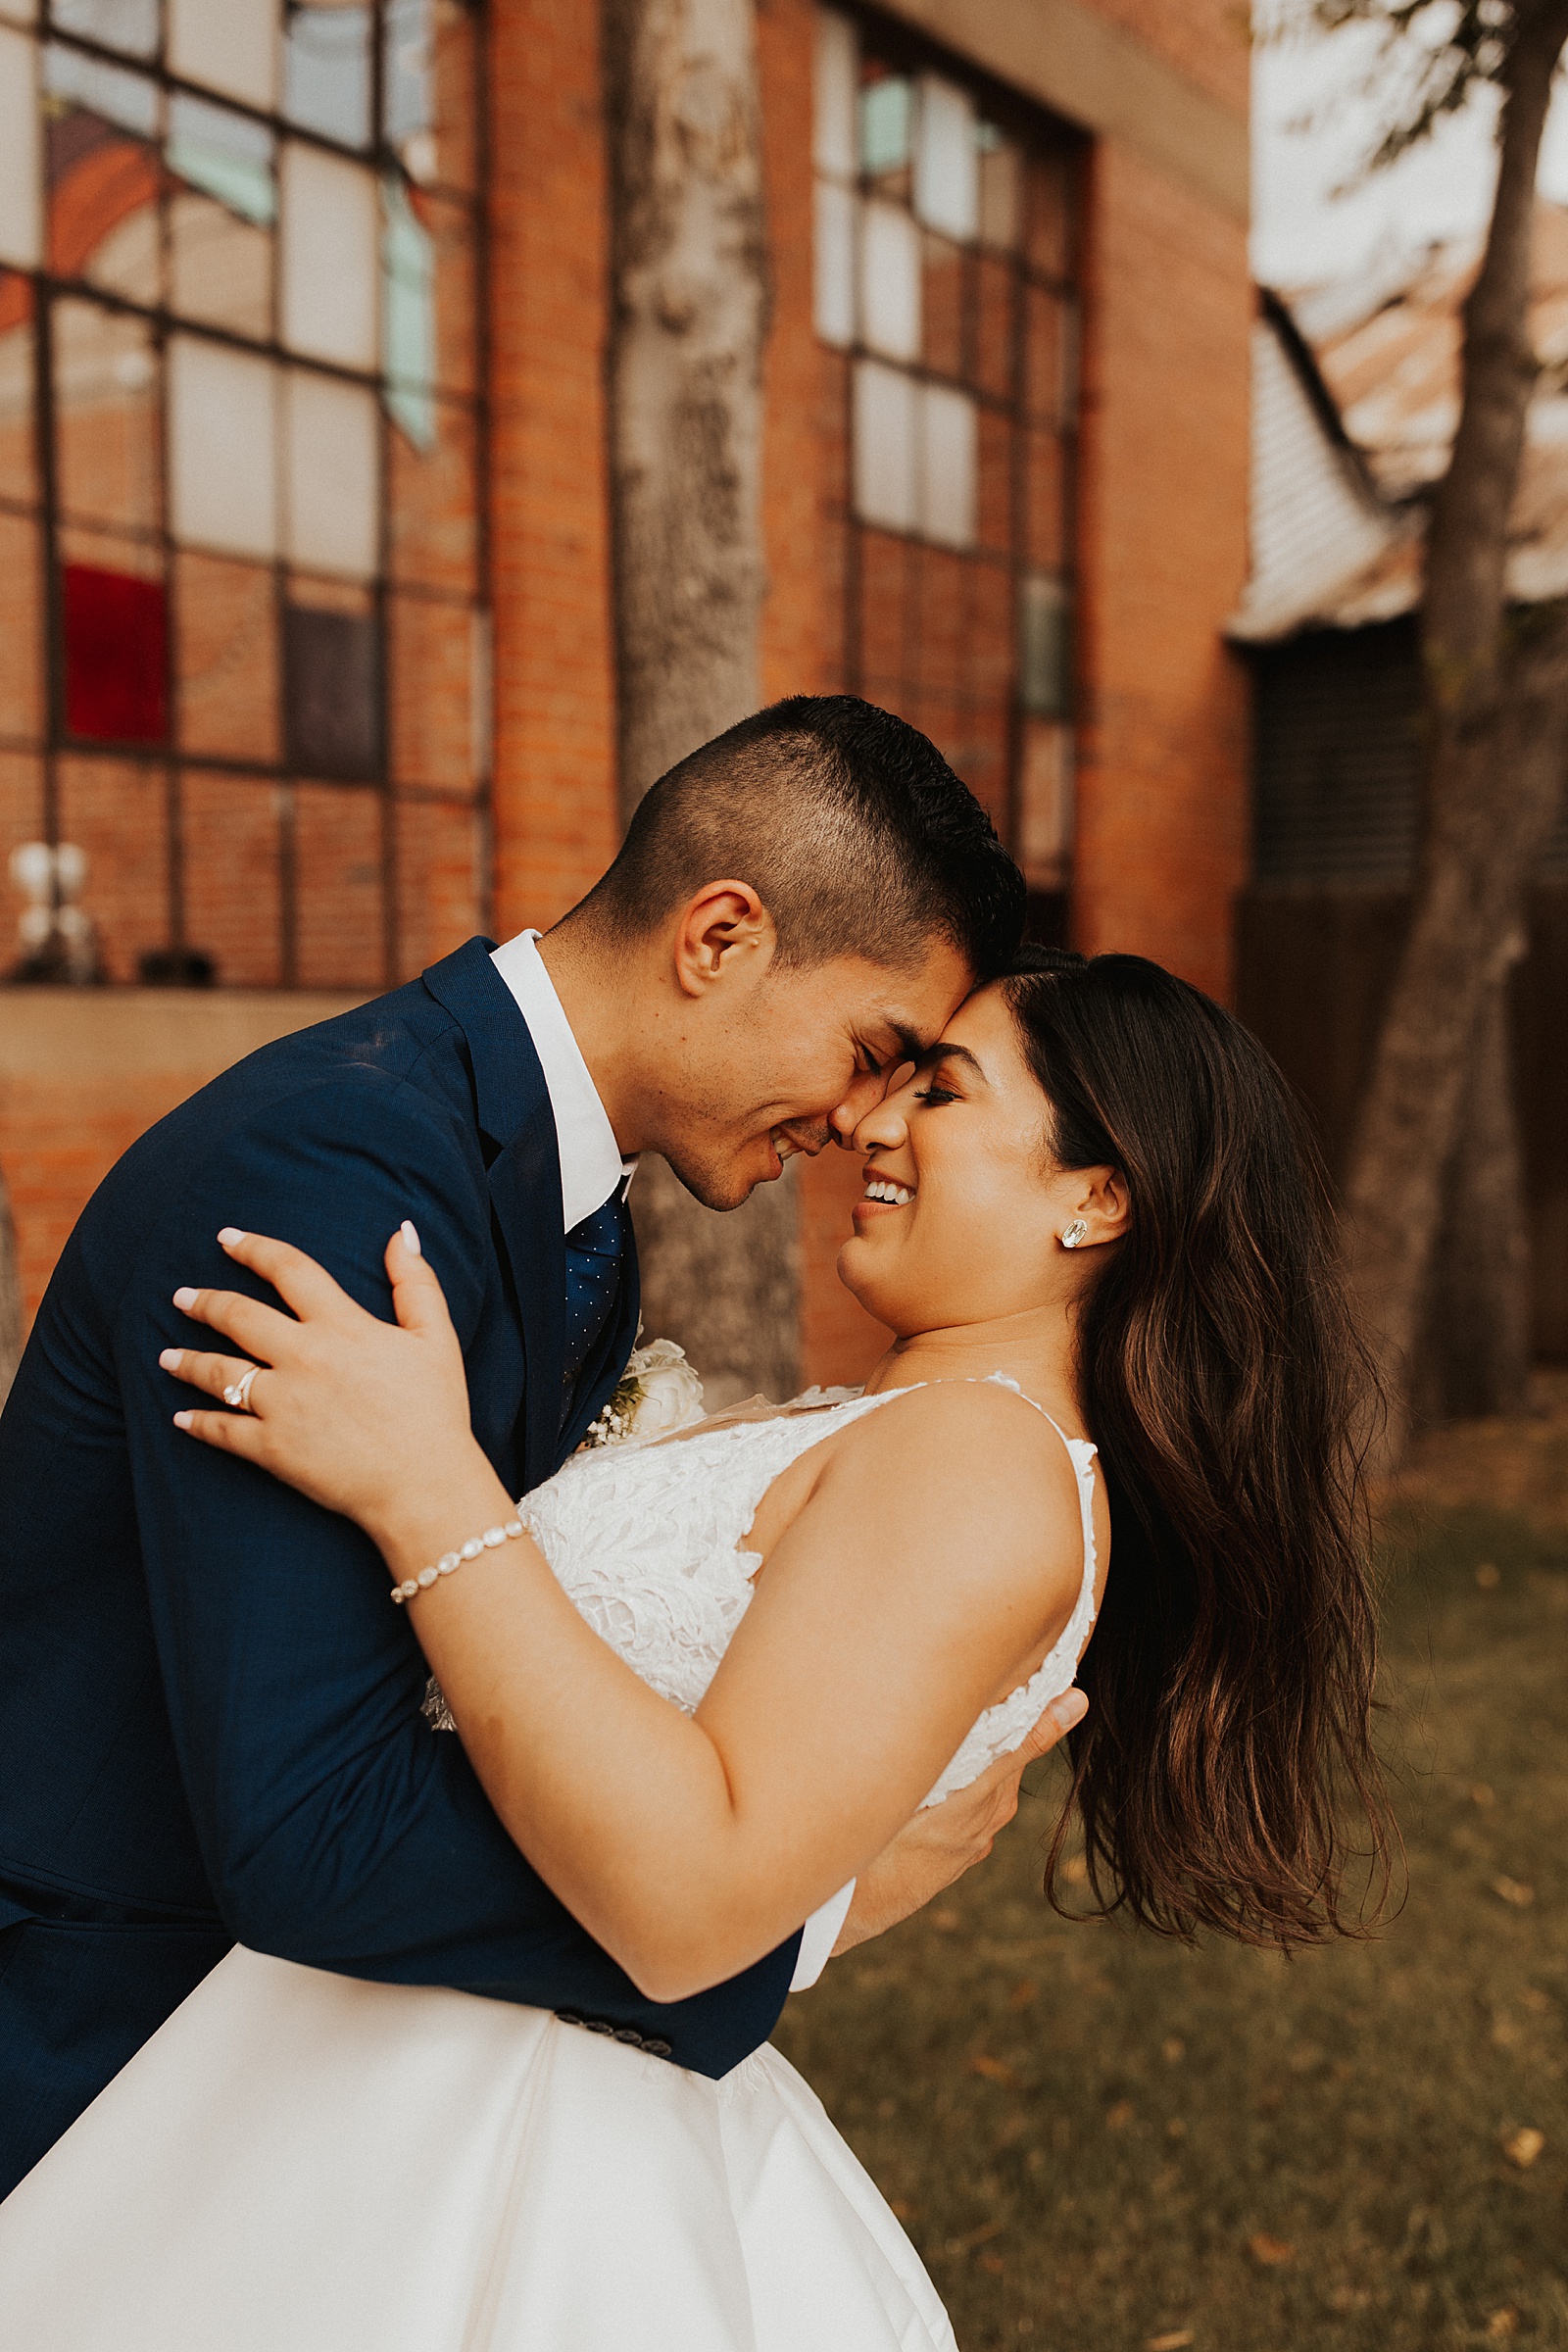 A bride and groom photo at the SoDa District Courtyard in Abilene, TX.